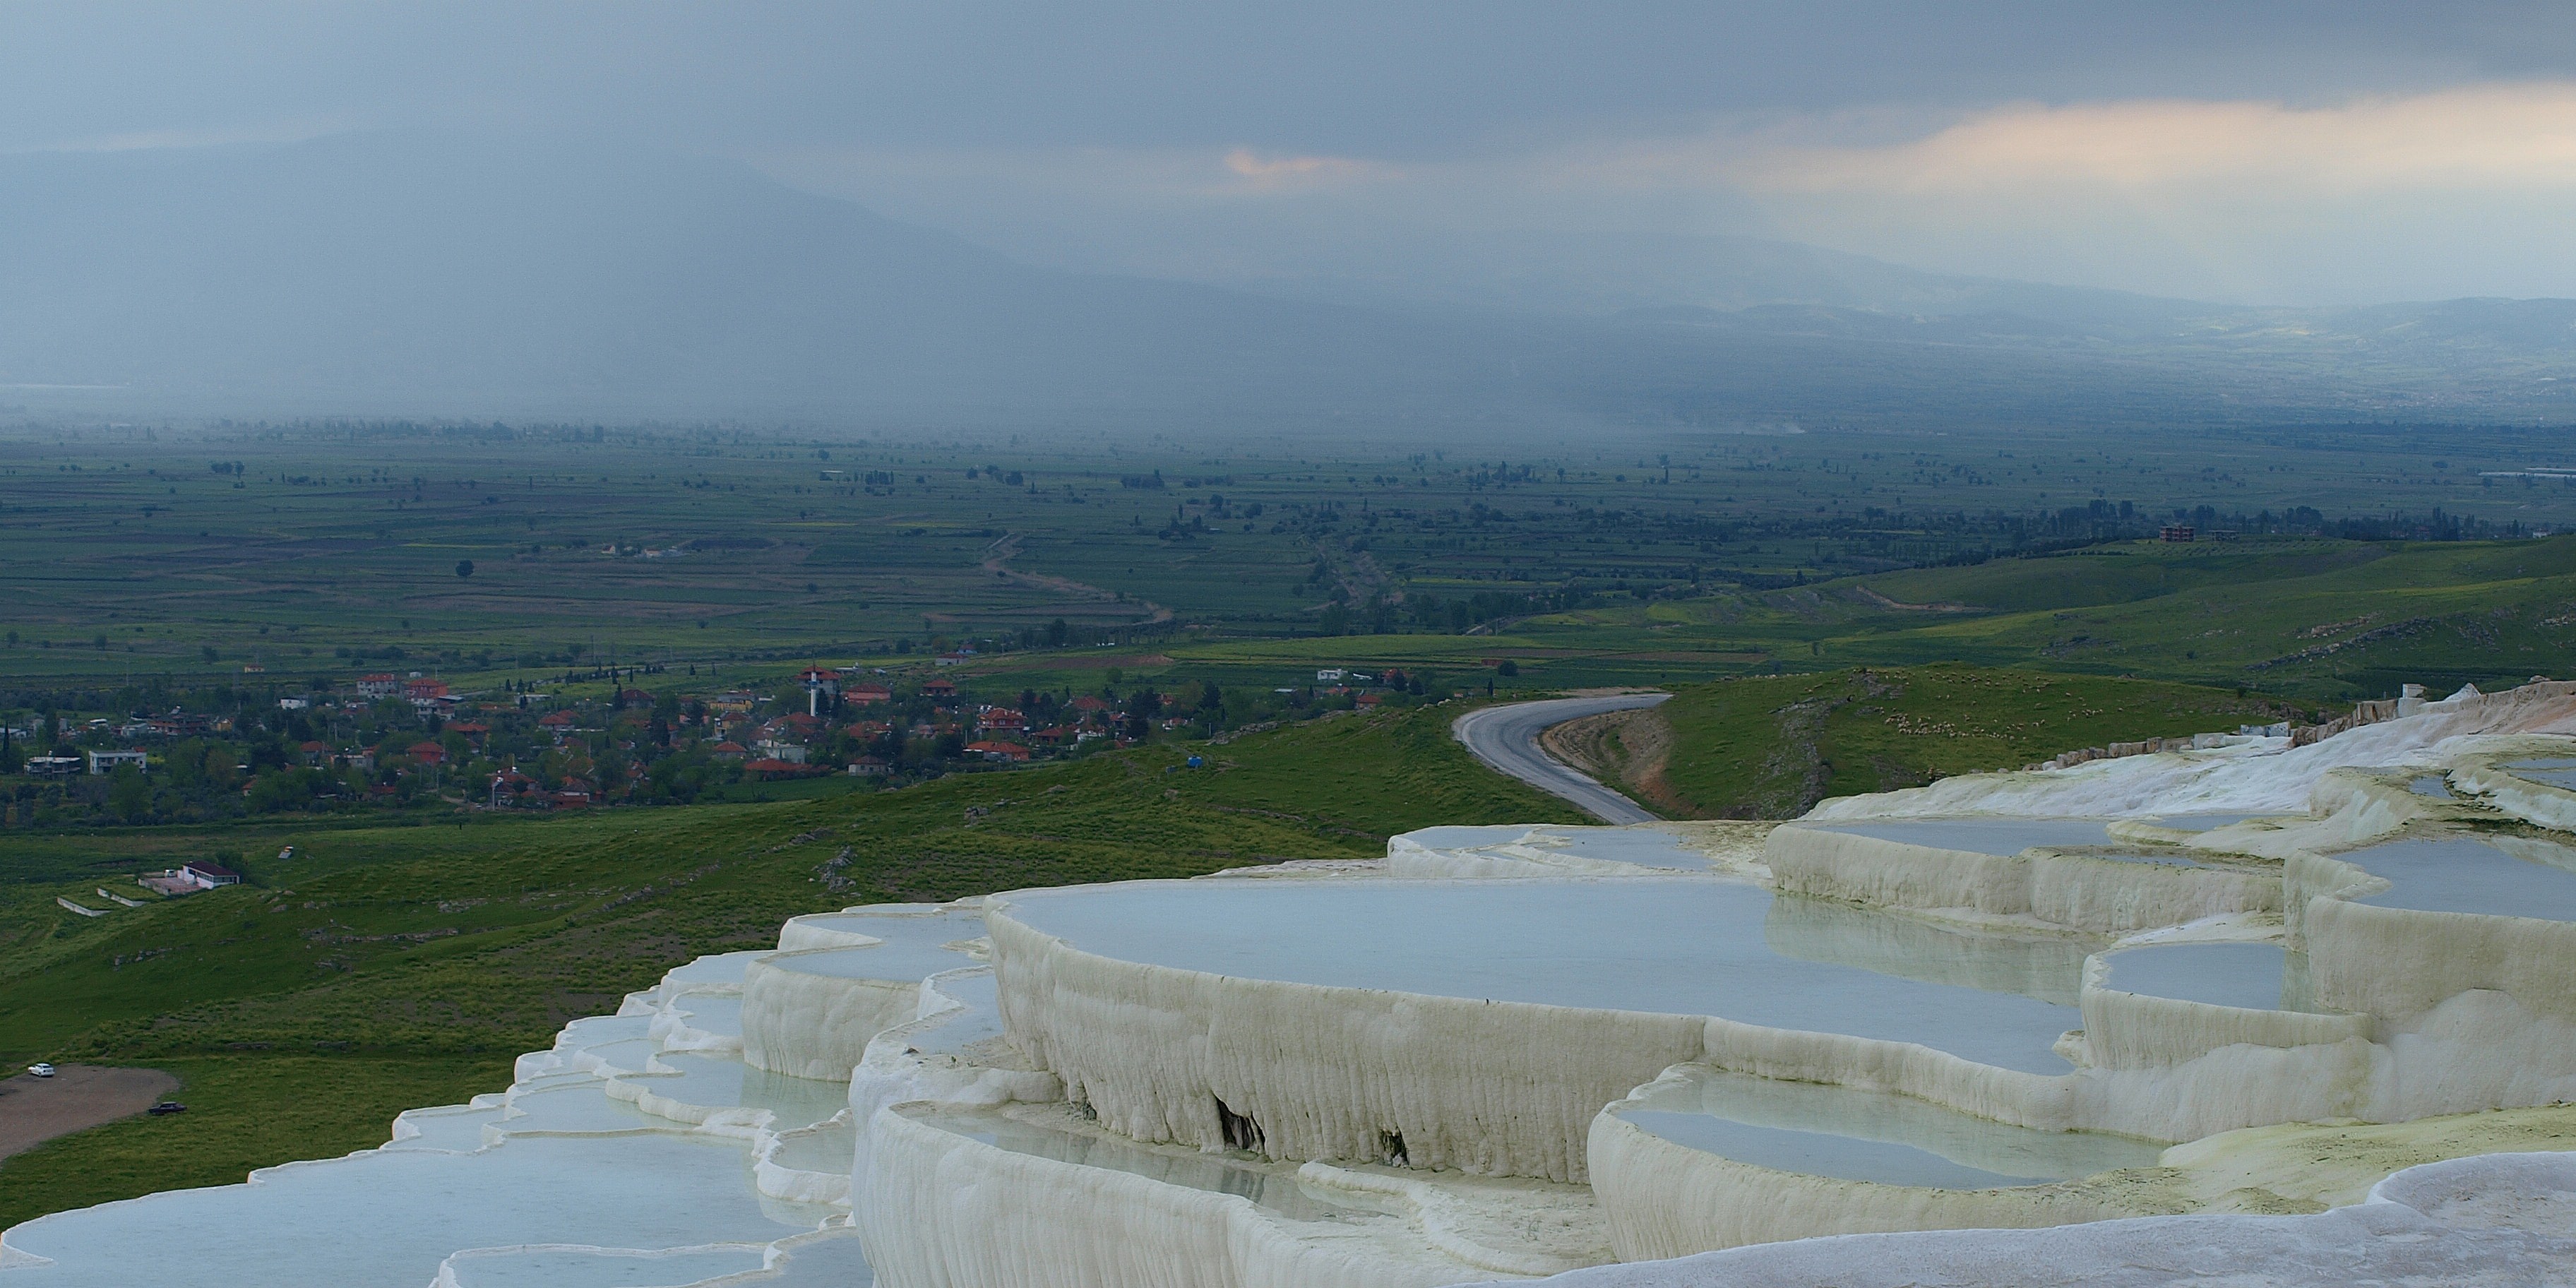 Essence of reminiscence – that unforgettable journey to Pamukkale